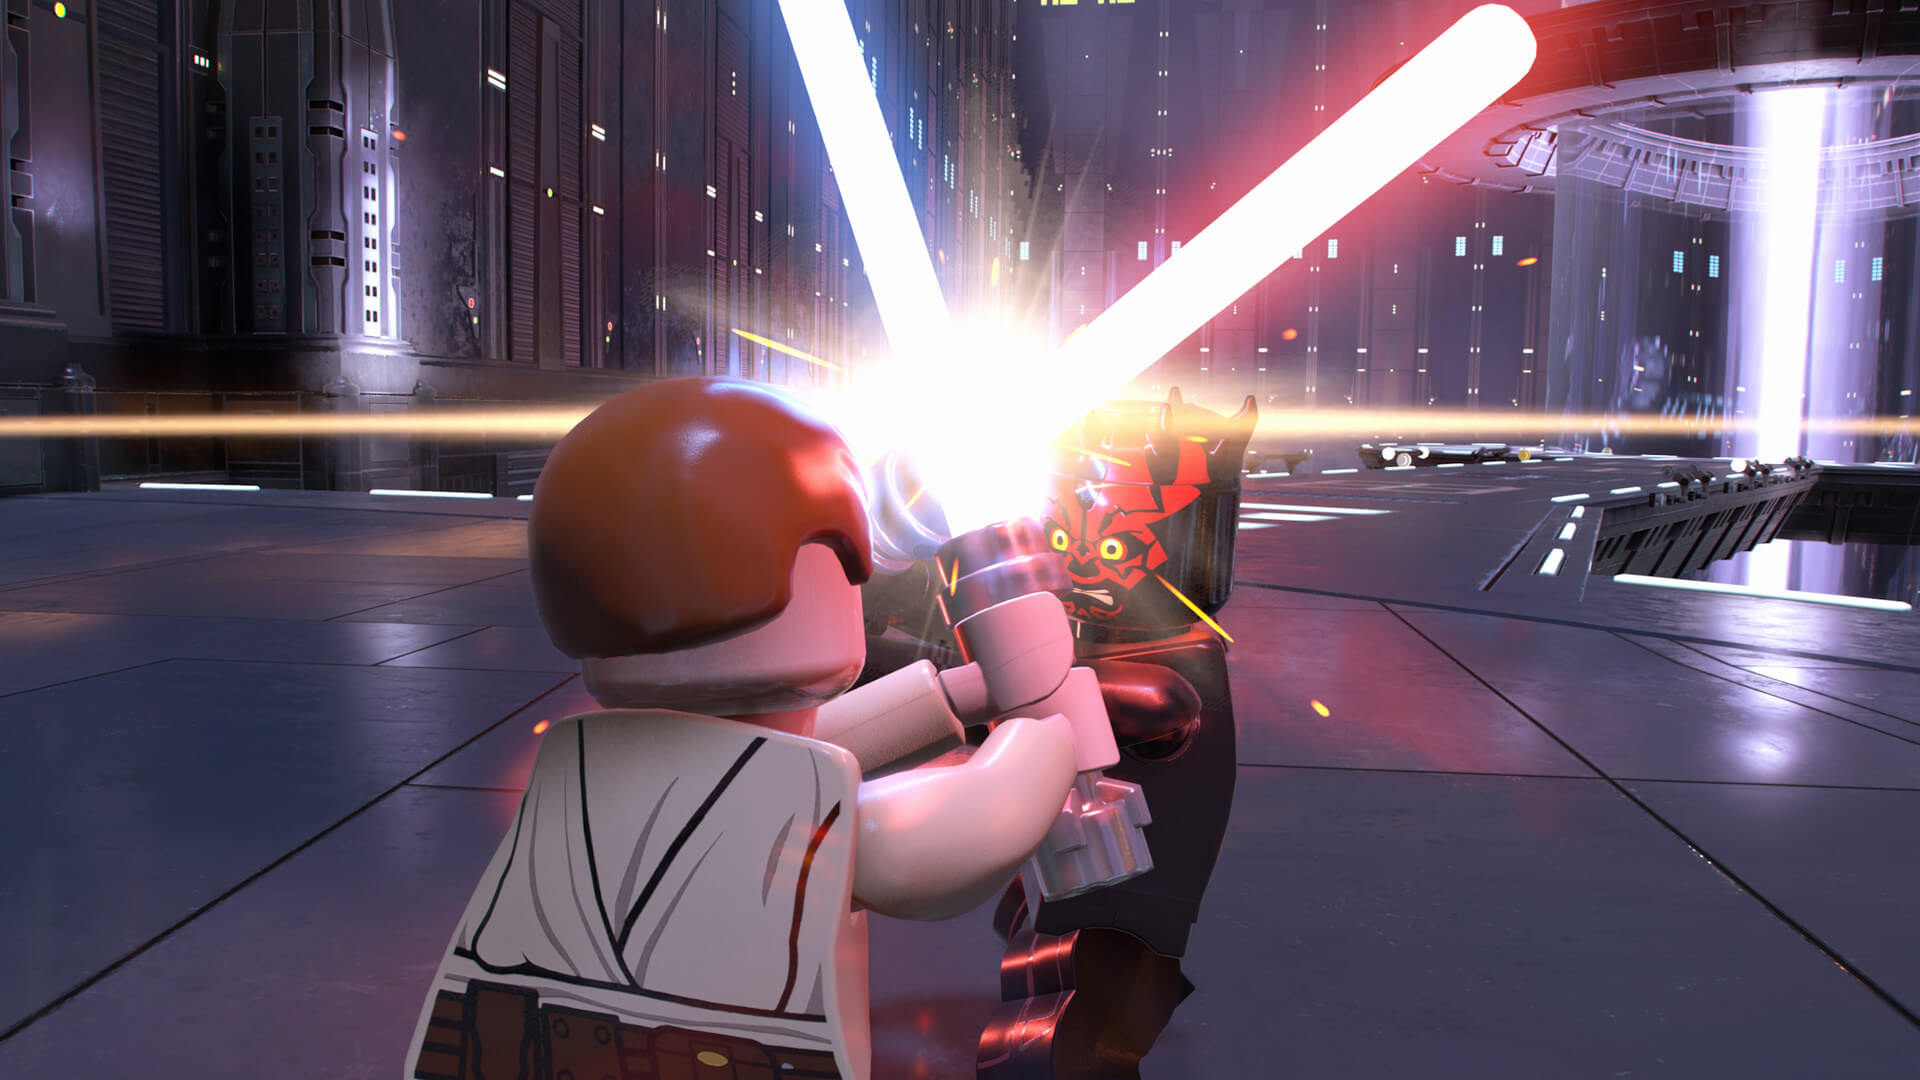 Gameplay footage, LEGO Star Wars, Exclusive preview, 44 minutes of excitement, 1920x1080 Full HD Desktop